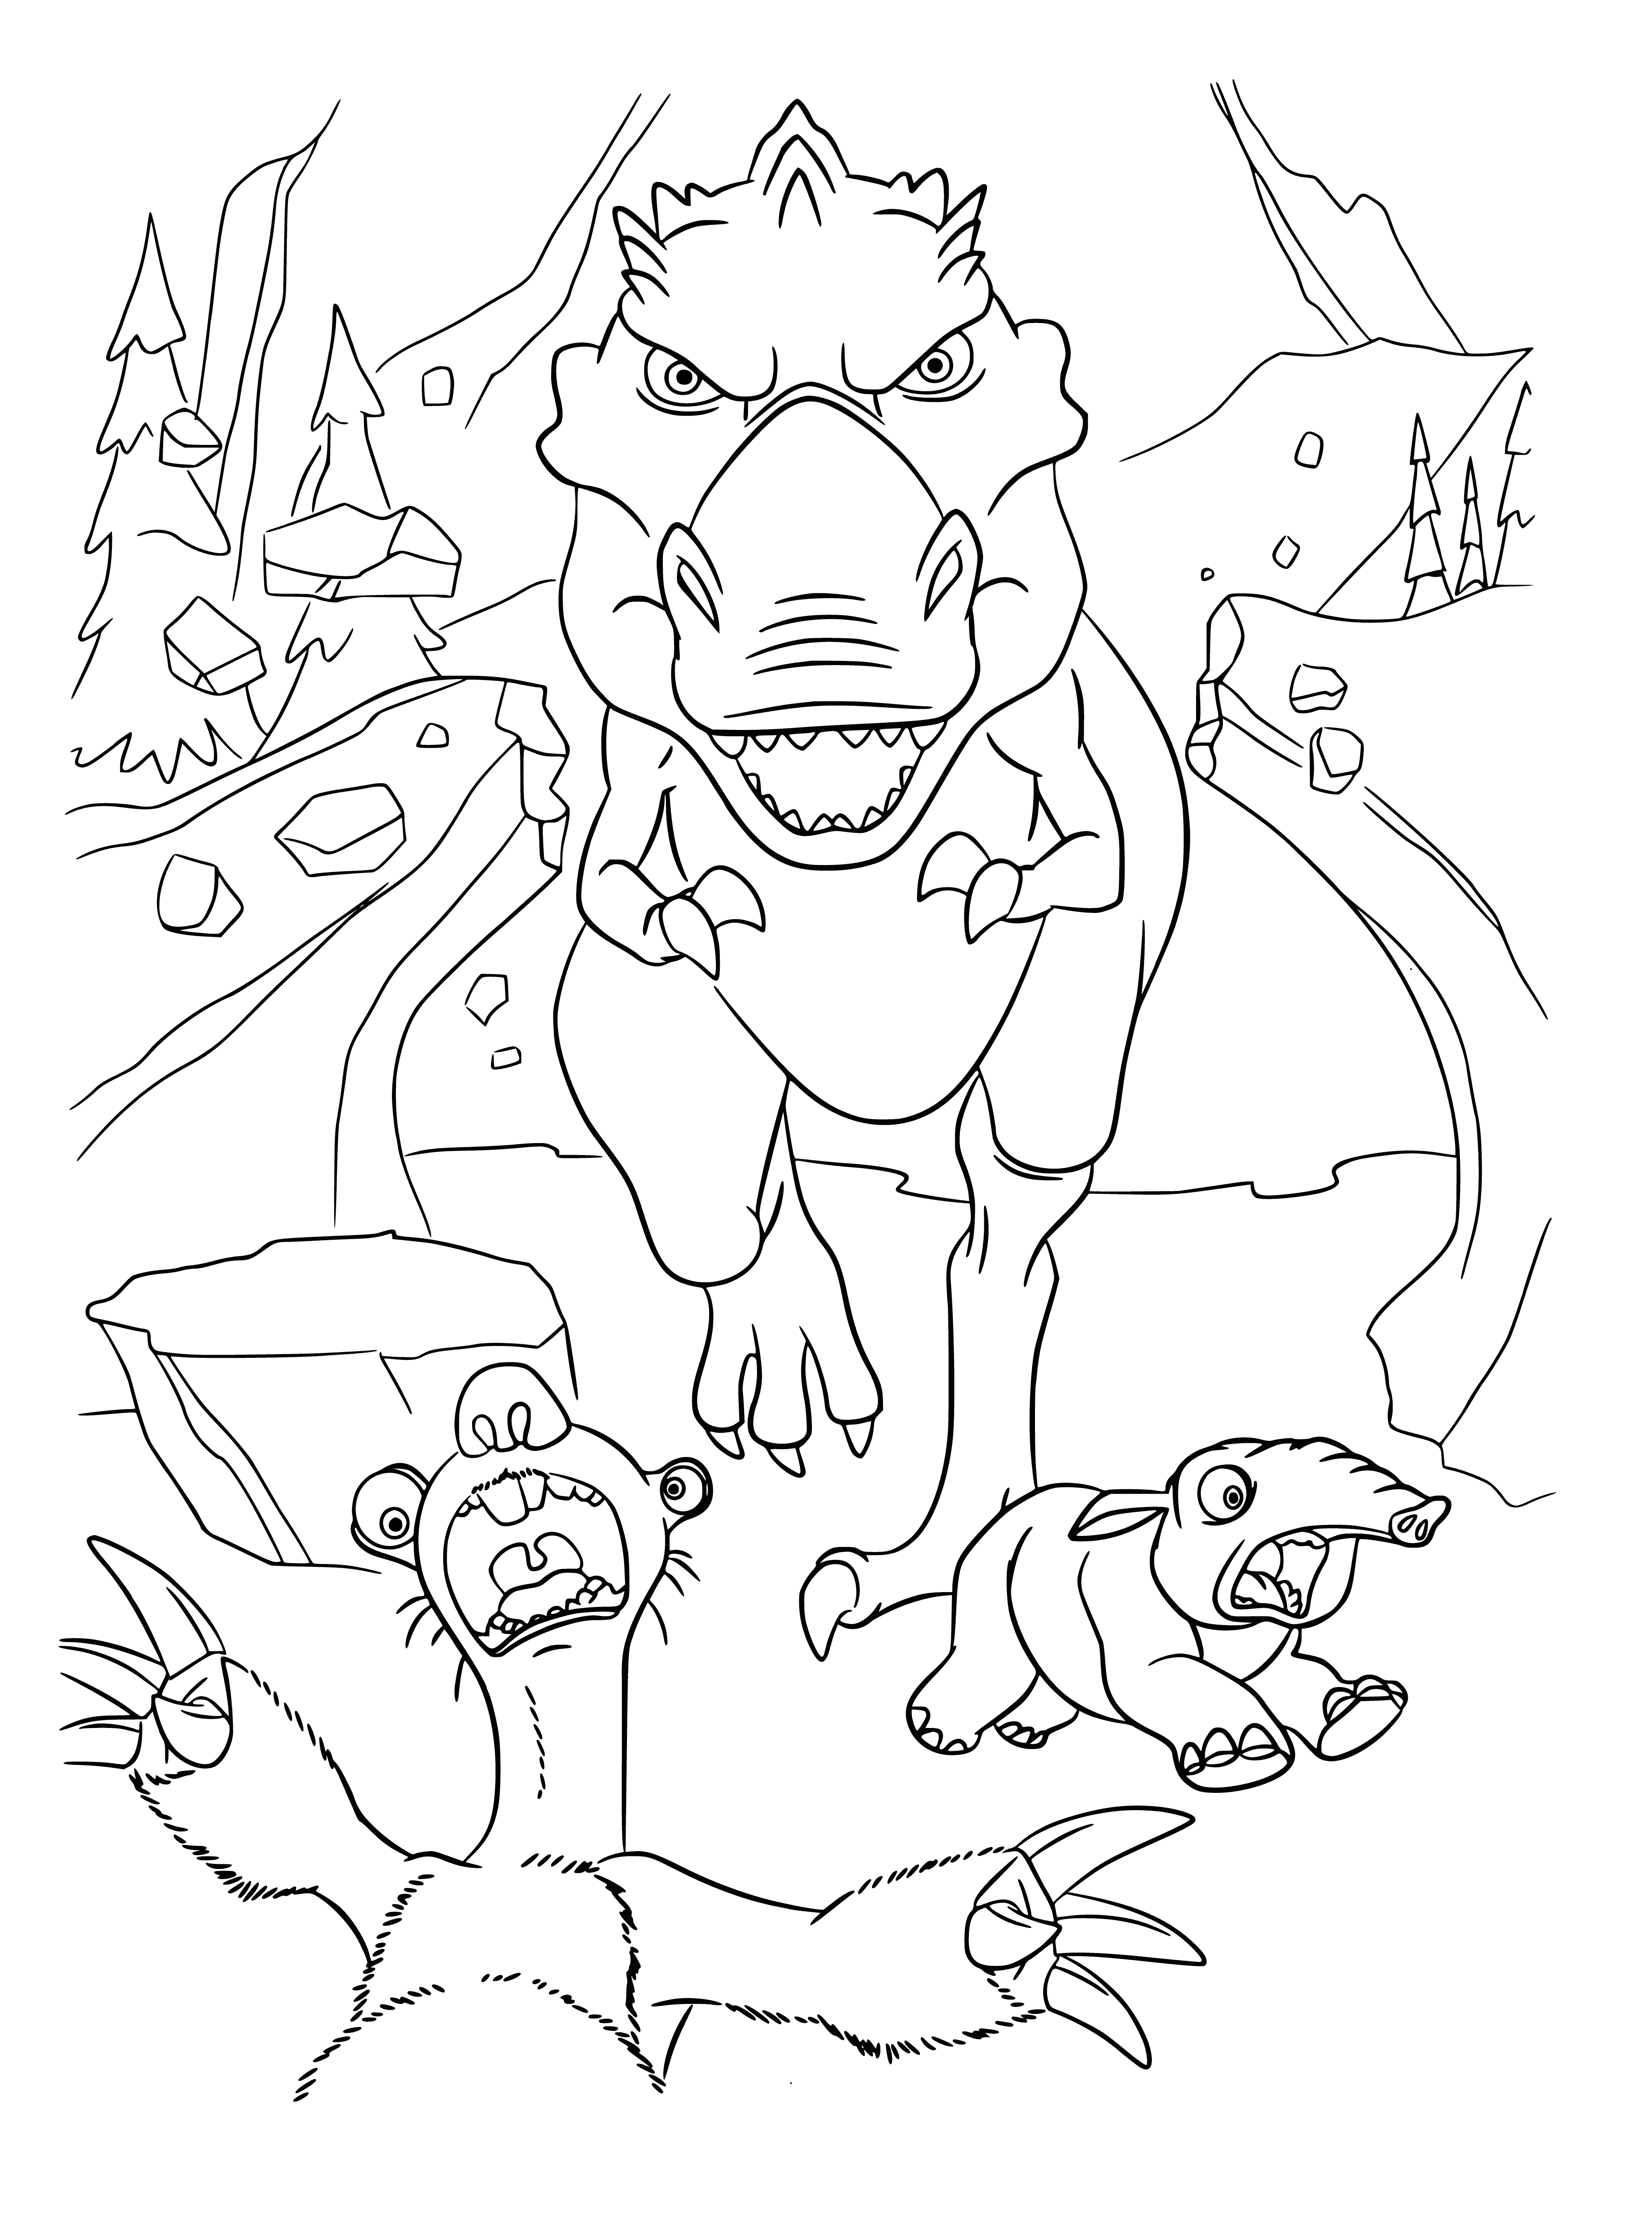 coloring page: Sid the Sloth from Ice Age is panicked and running away from something in this coloring page!